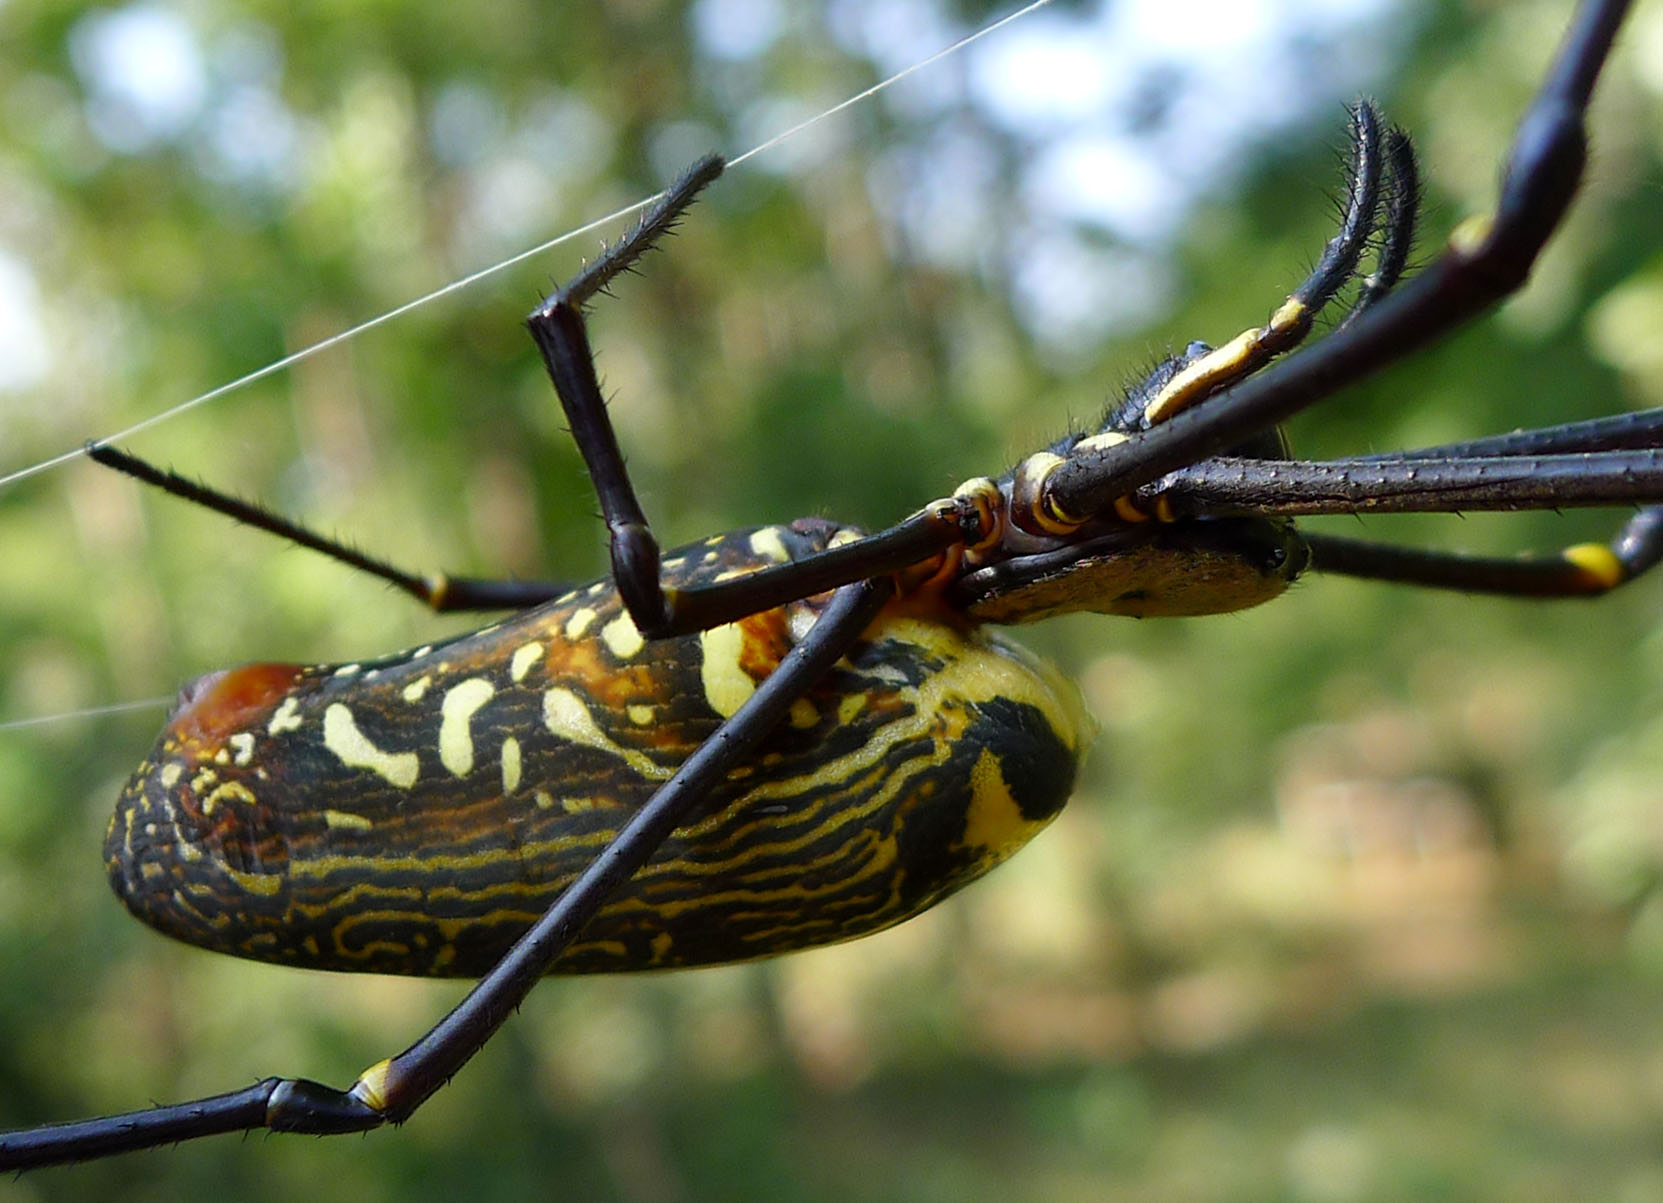 File:Giant Wood Spider - Nephila maculata. - Flickr - gailhampshire ...